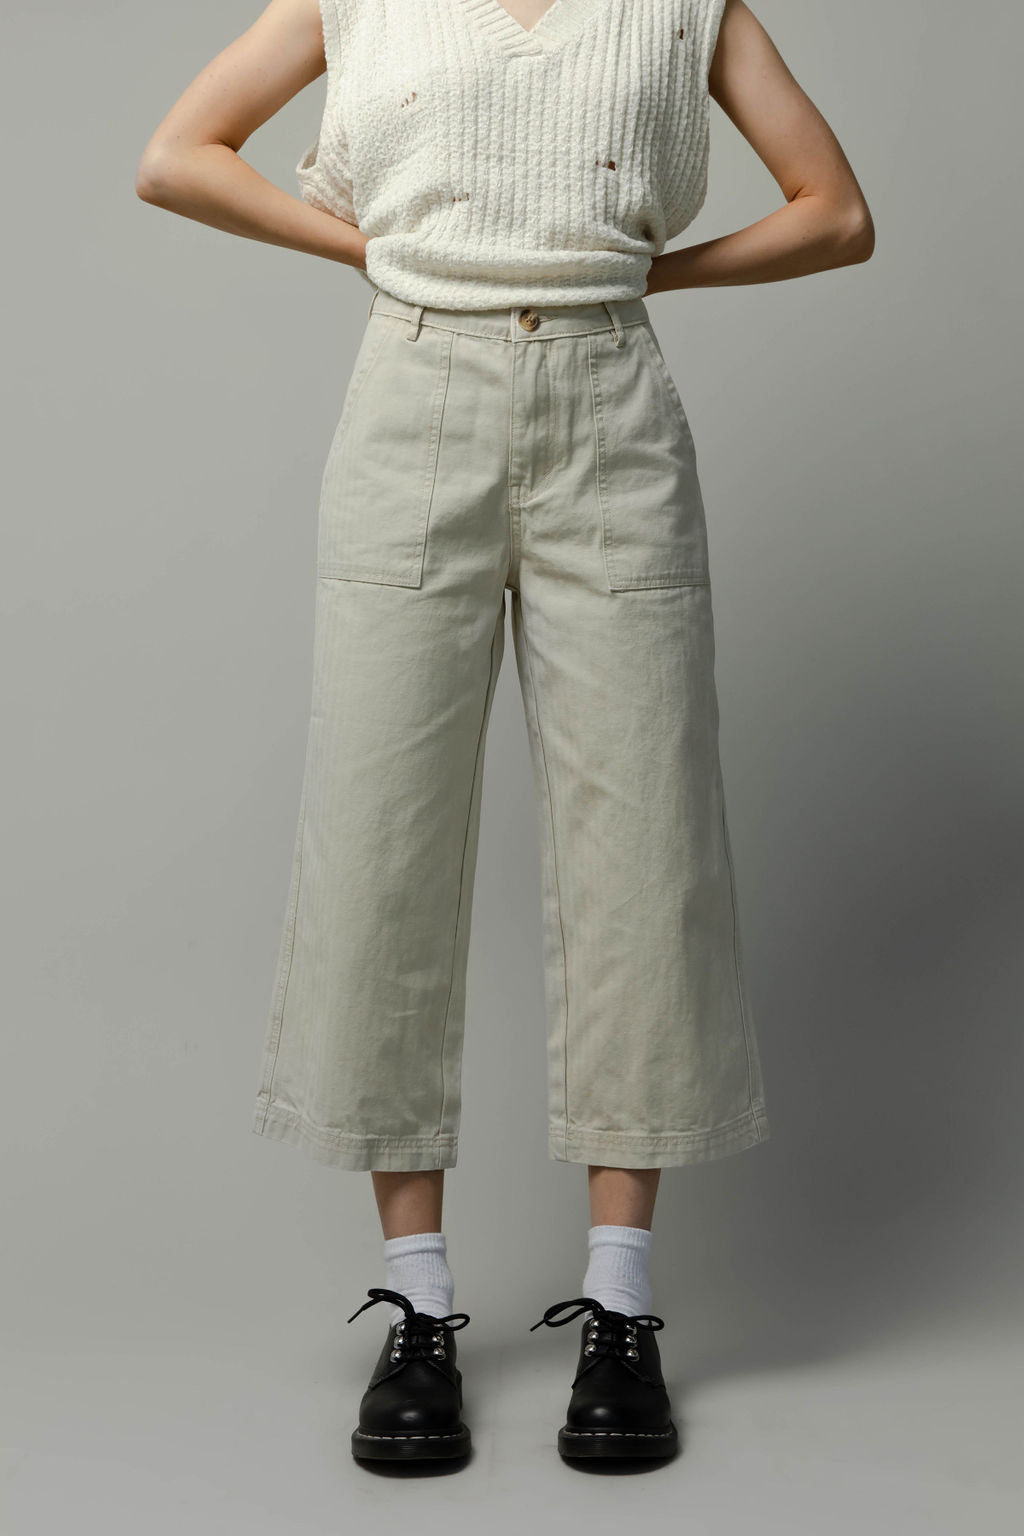 The Camilla Day Pant